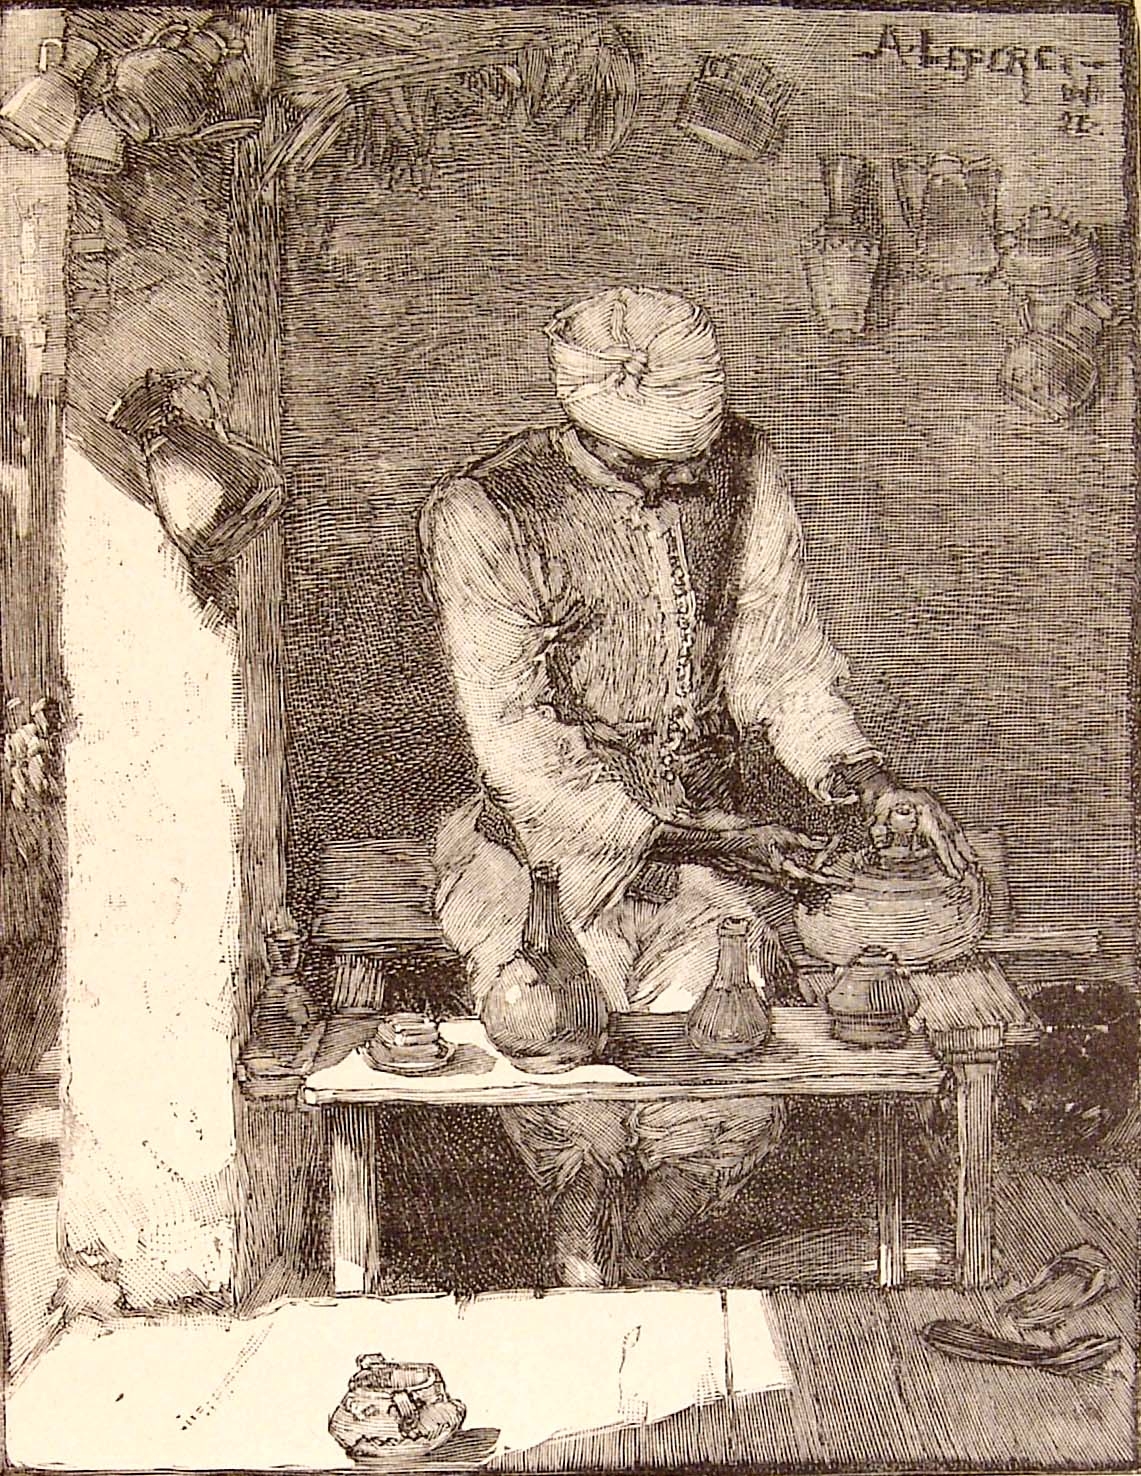 an old black and white illustration of a man sitting on a bench